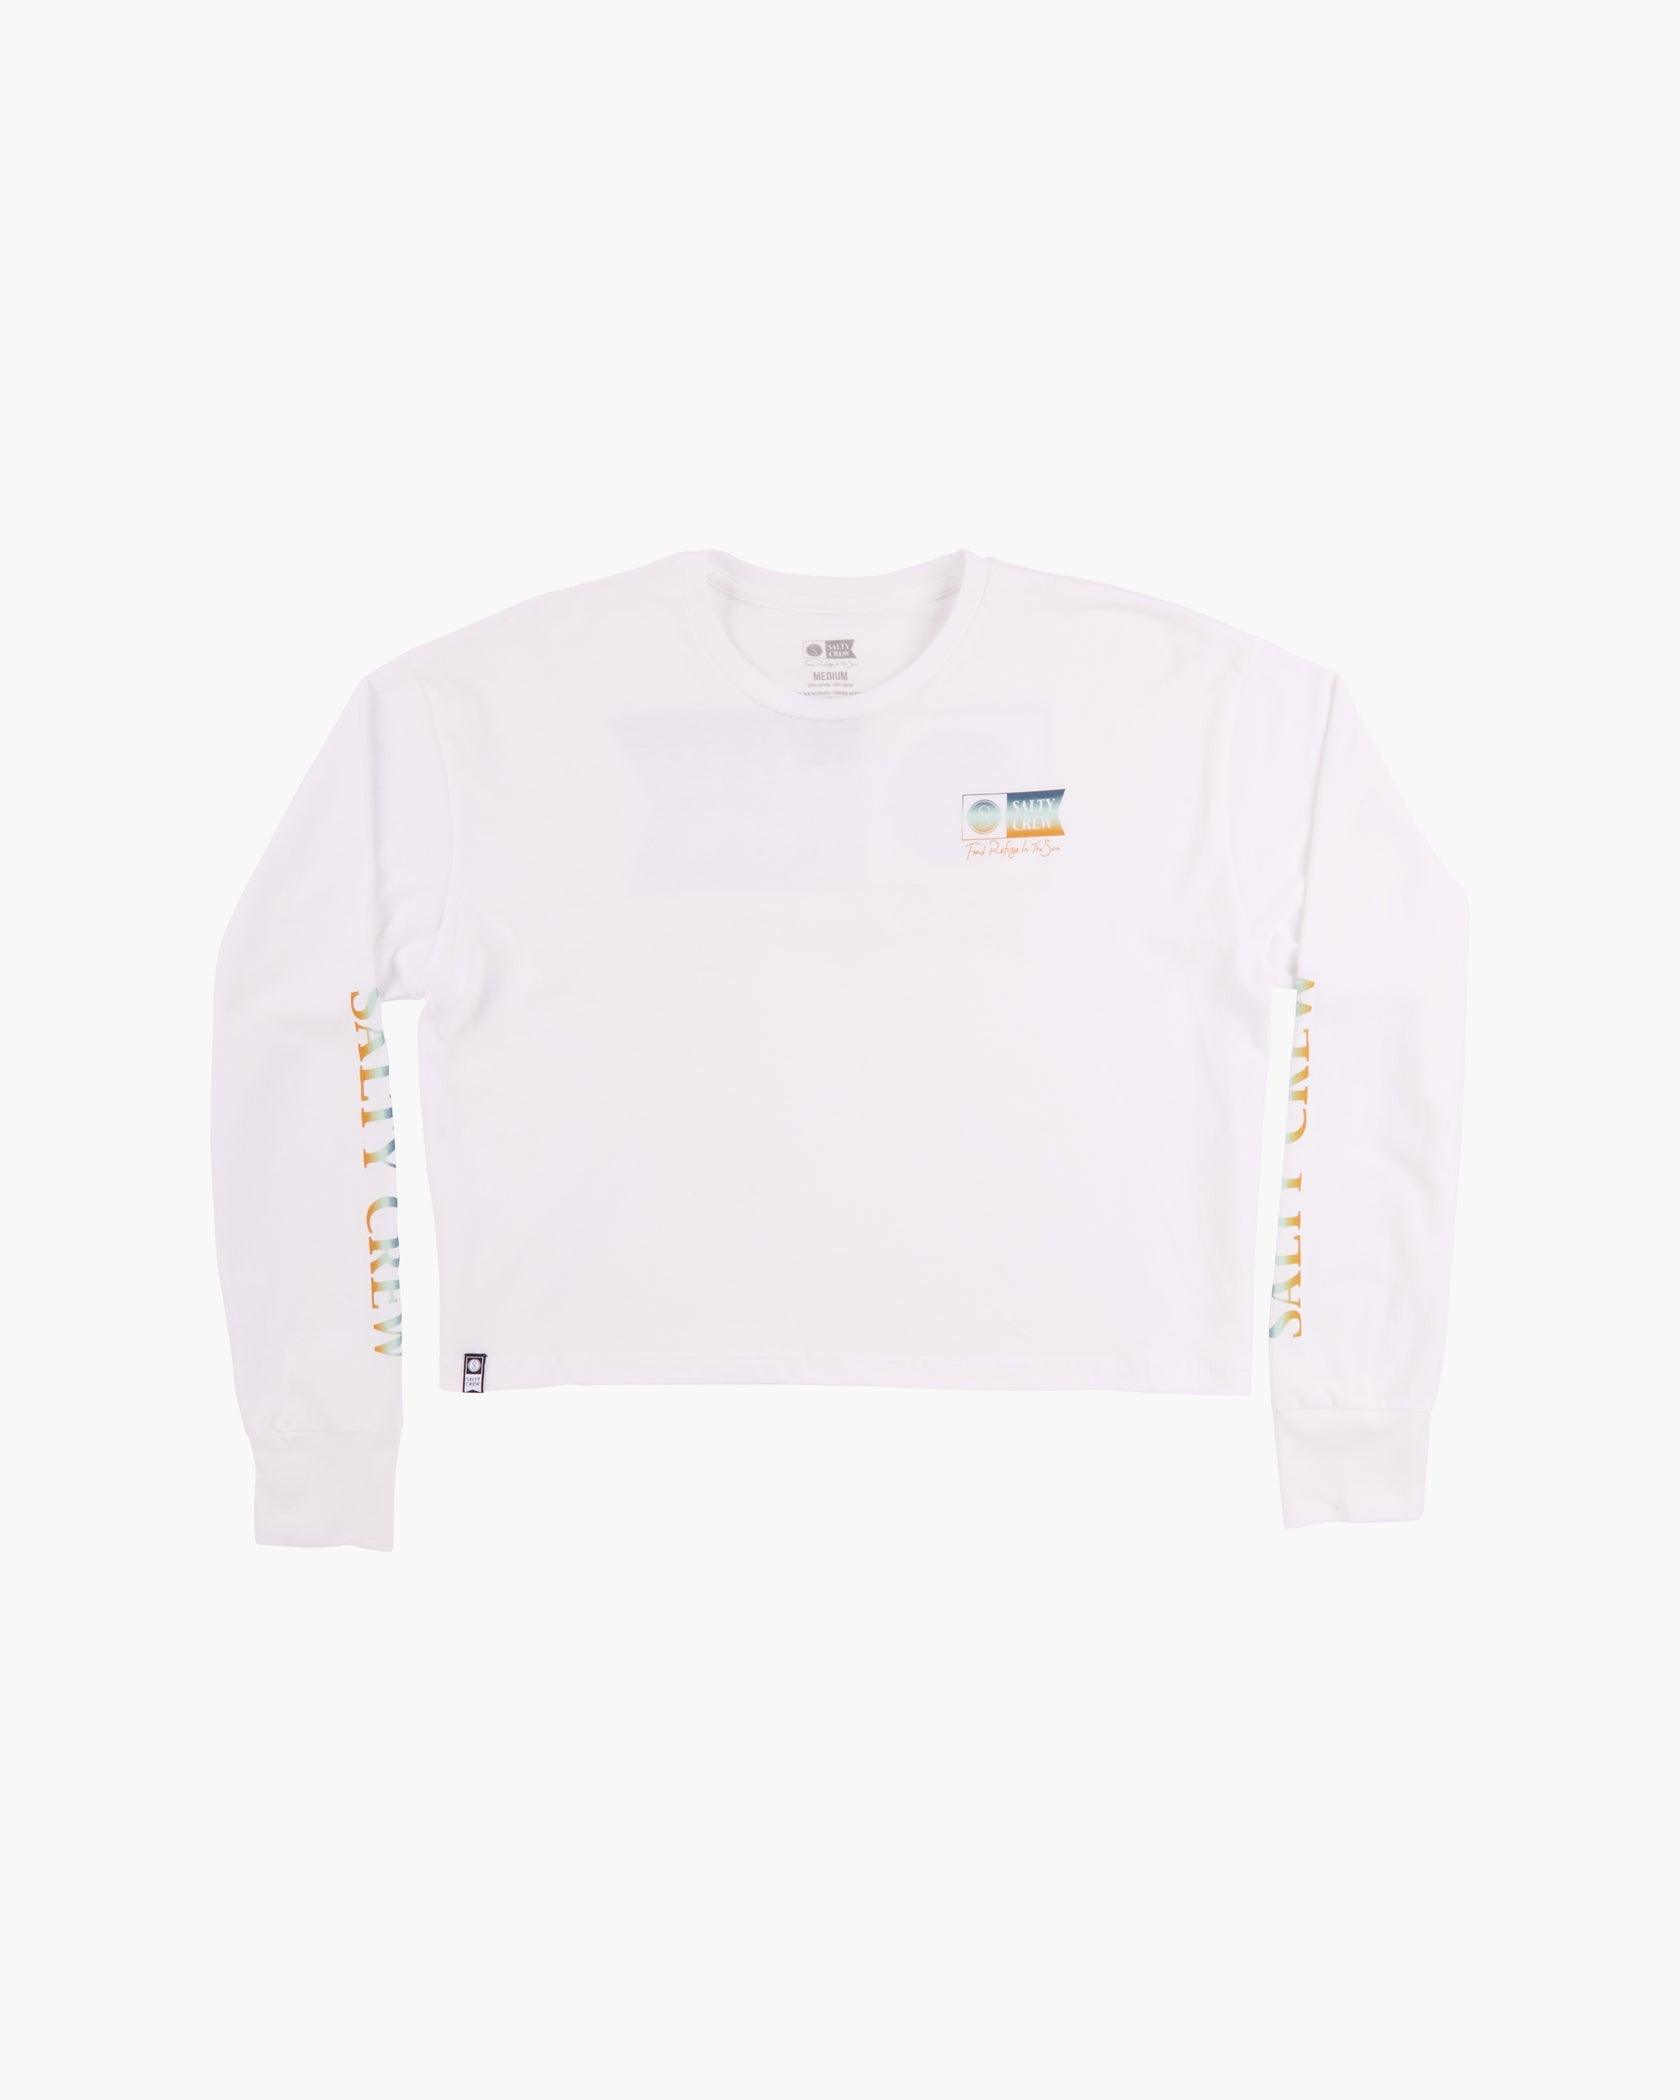 Alpha Gradient L/S Crop - White - Purpose-Built / Home of the Trades